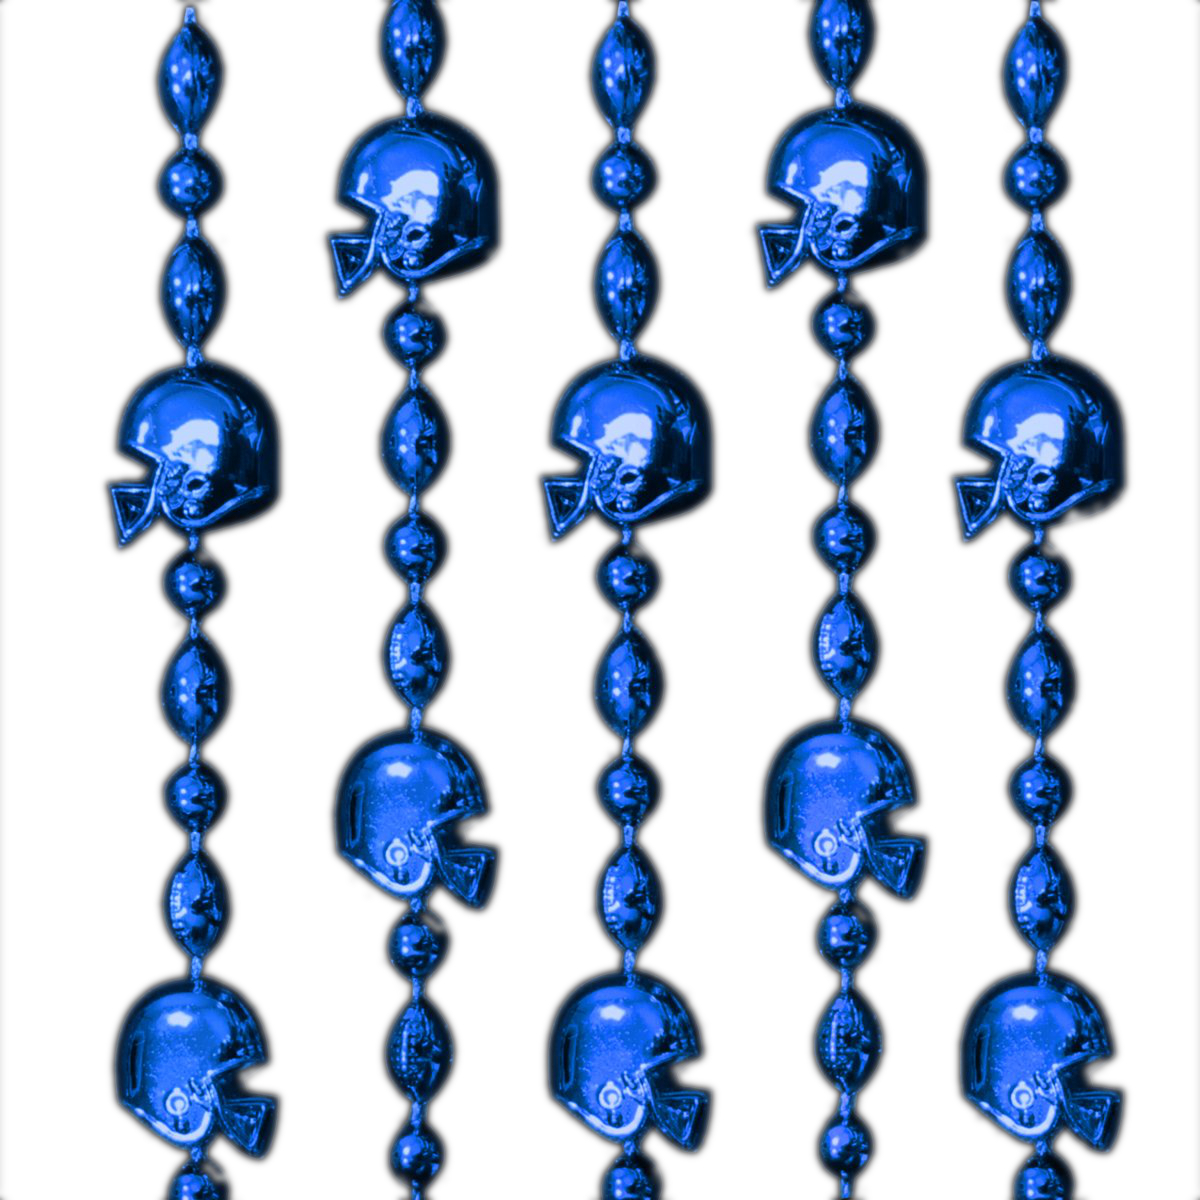 Football Helmet Bead Necklaces Metallic Blue Pack of 12 All Products